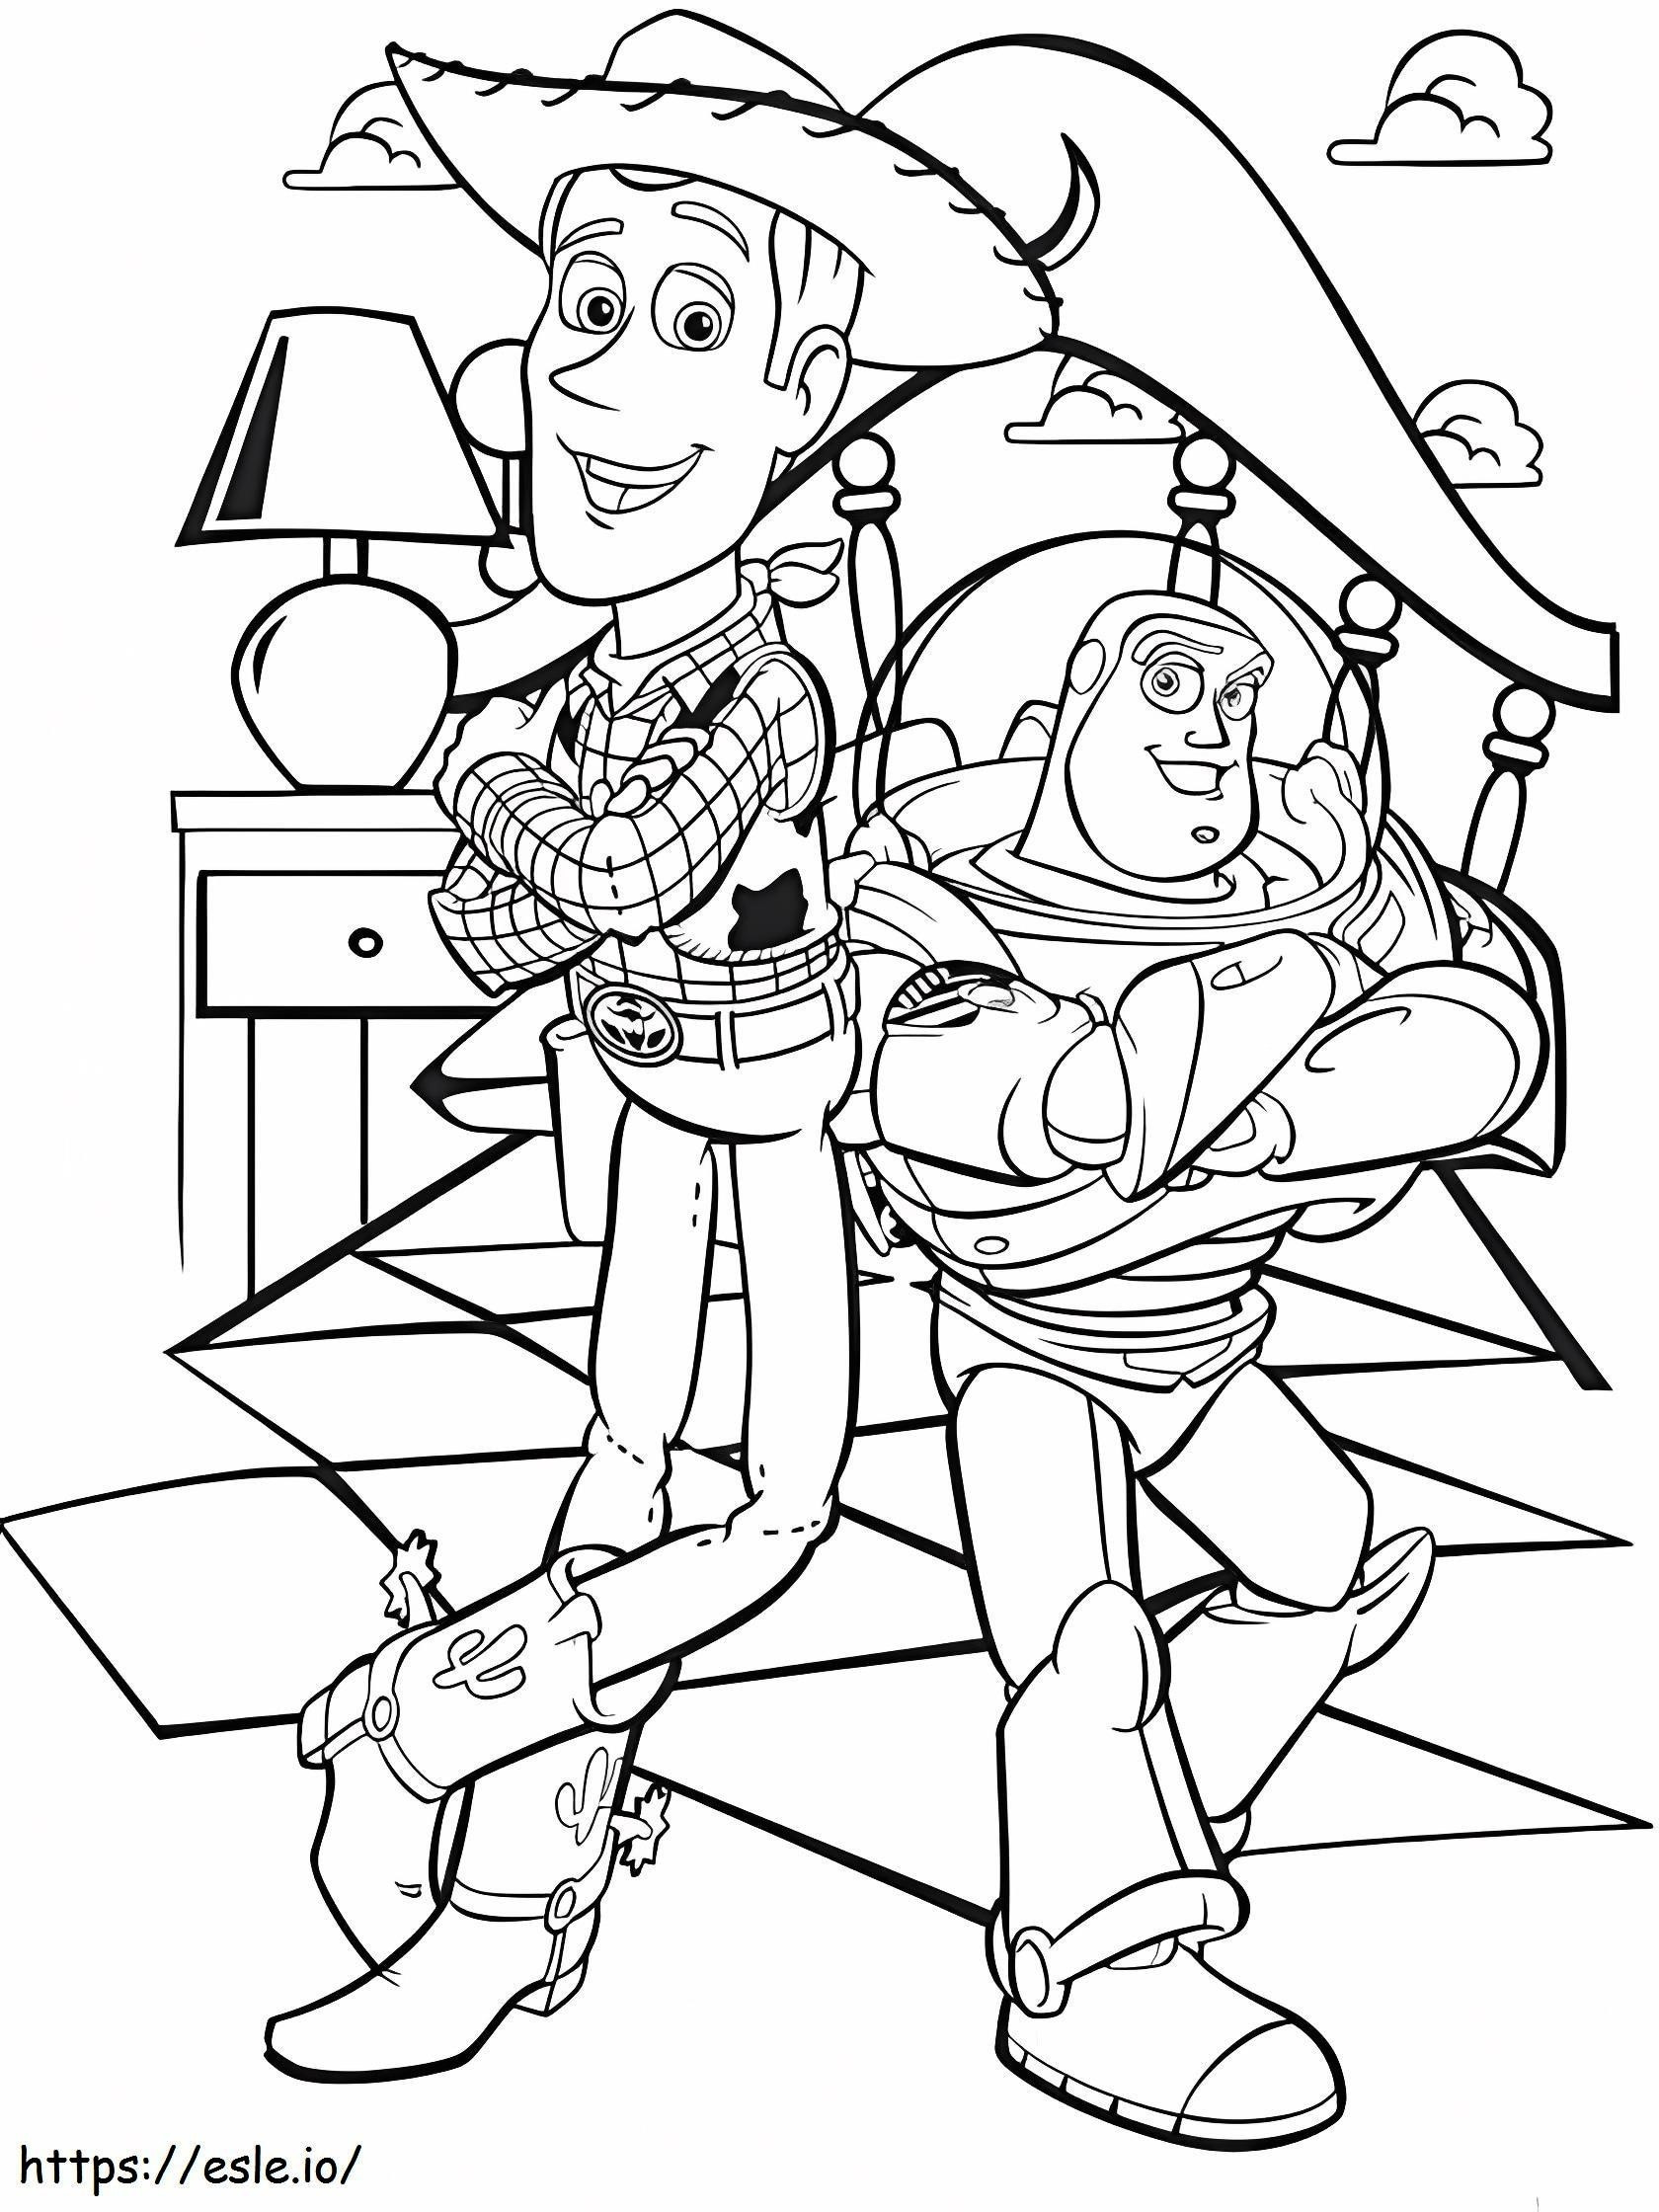 Woody And Buzz Smiling coloring page